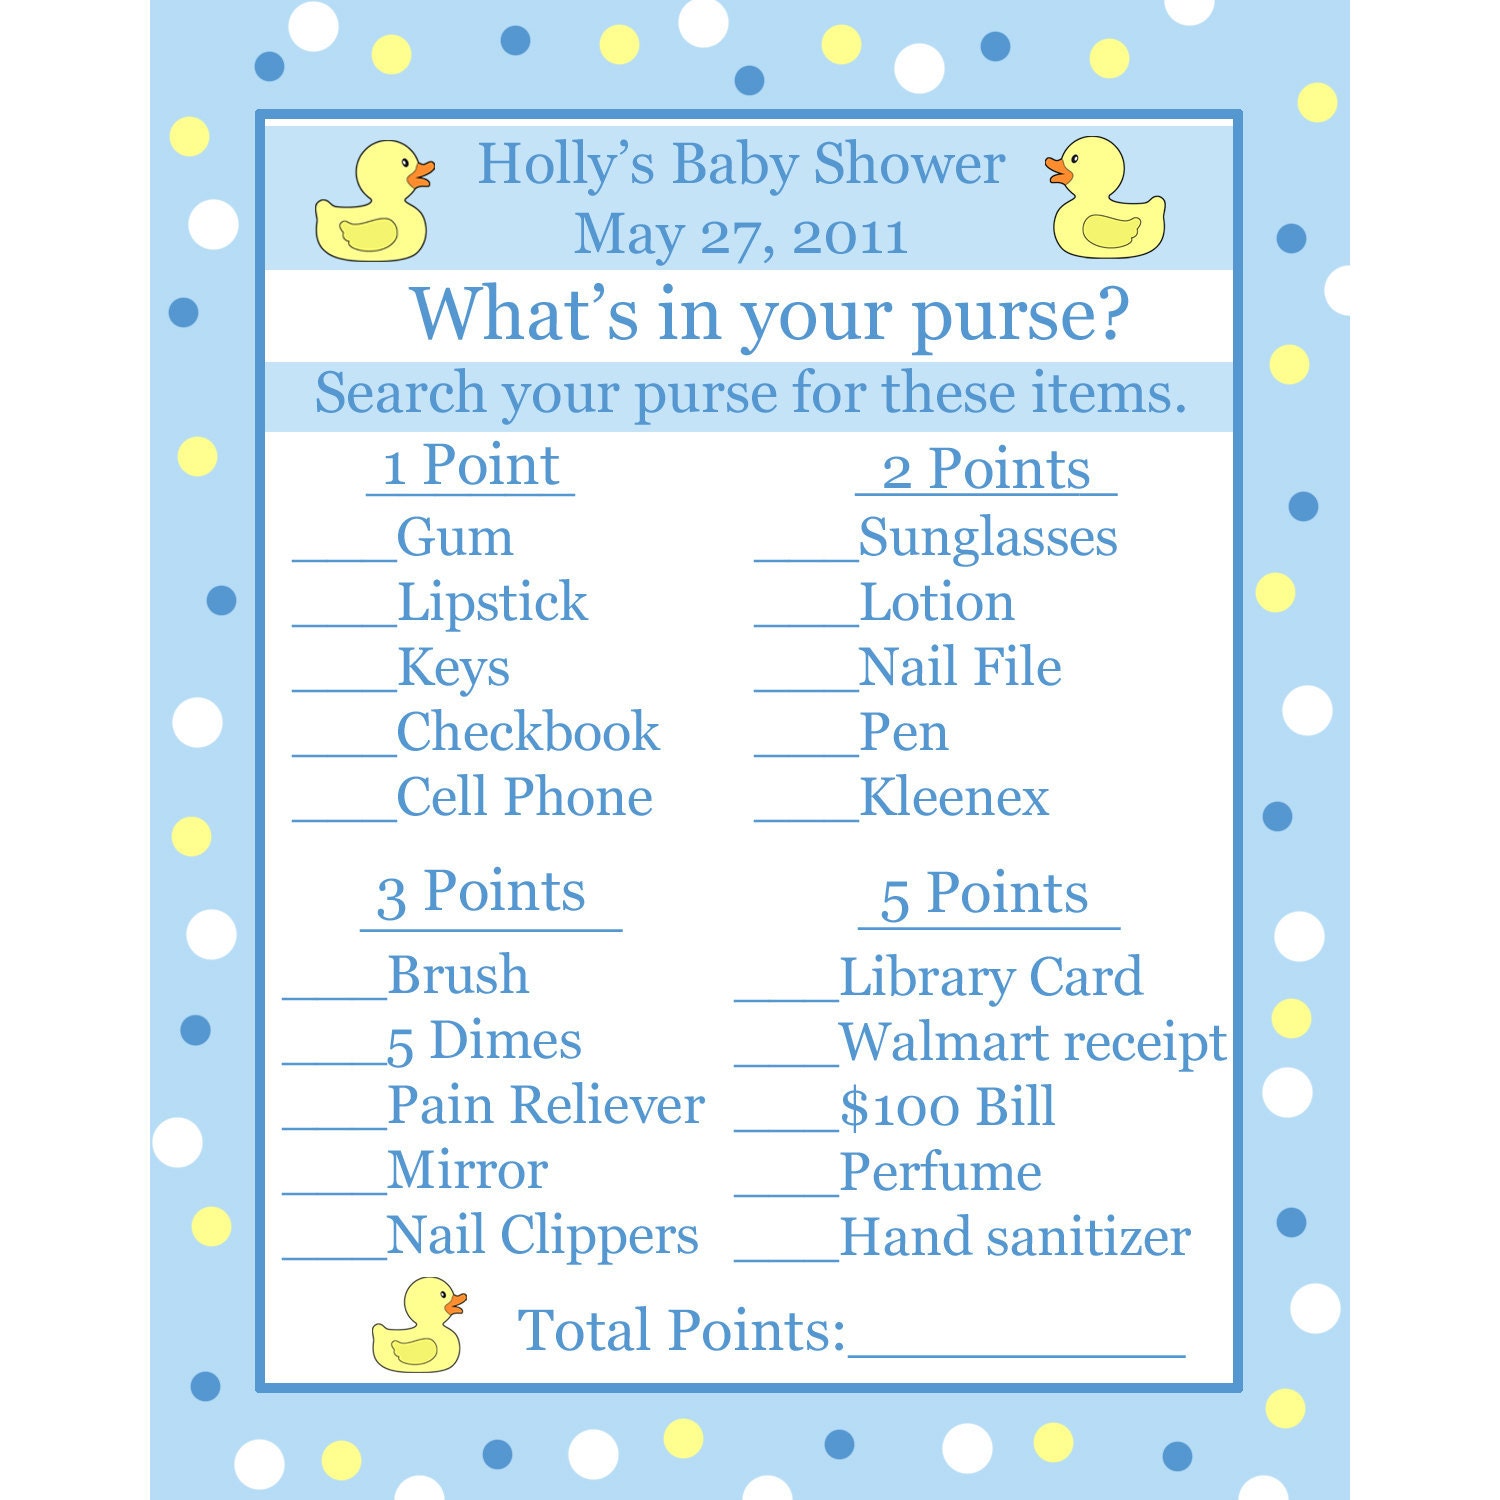 123 New baby shower game easy 778 24 Baby Shower Game Cards Whats In Your Purse Game by partyplace 